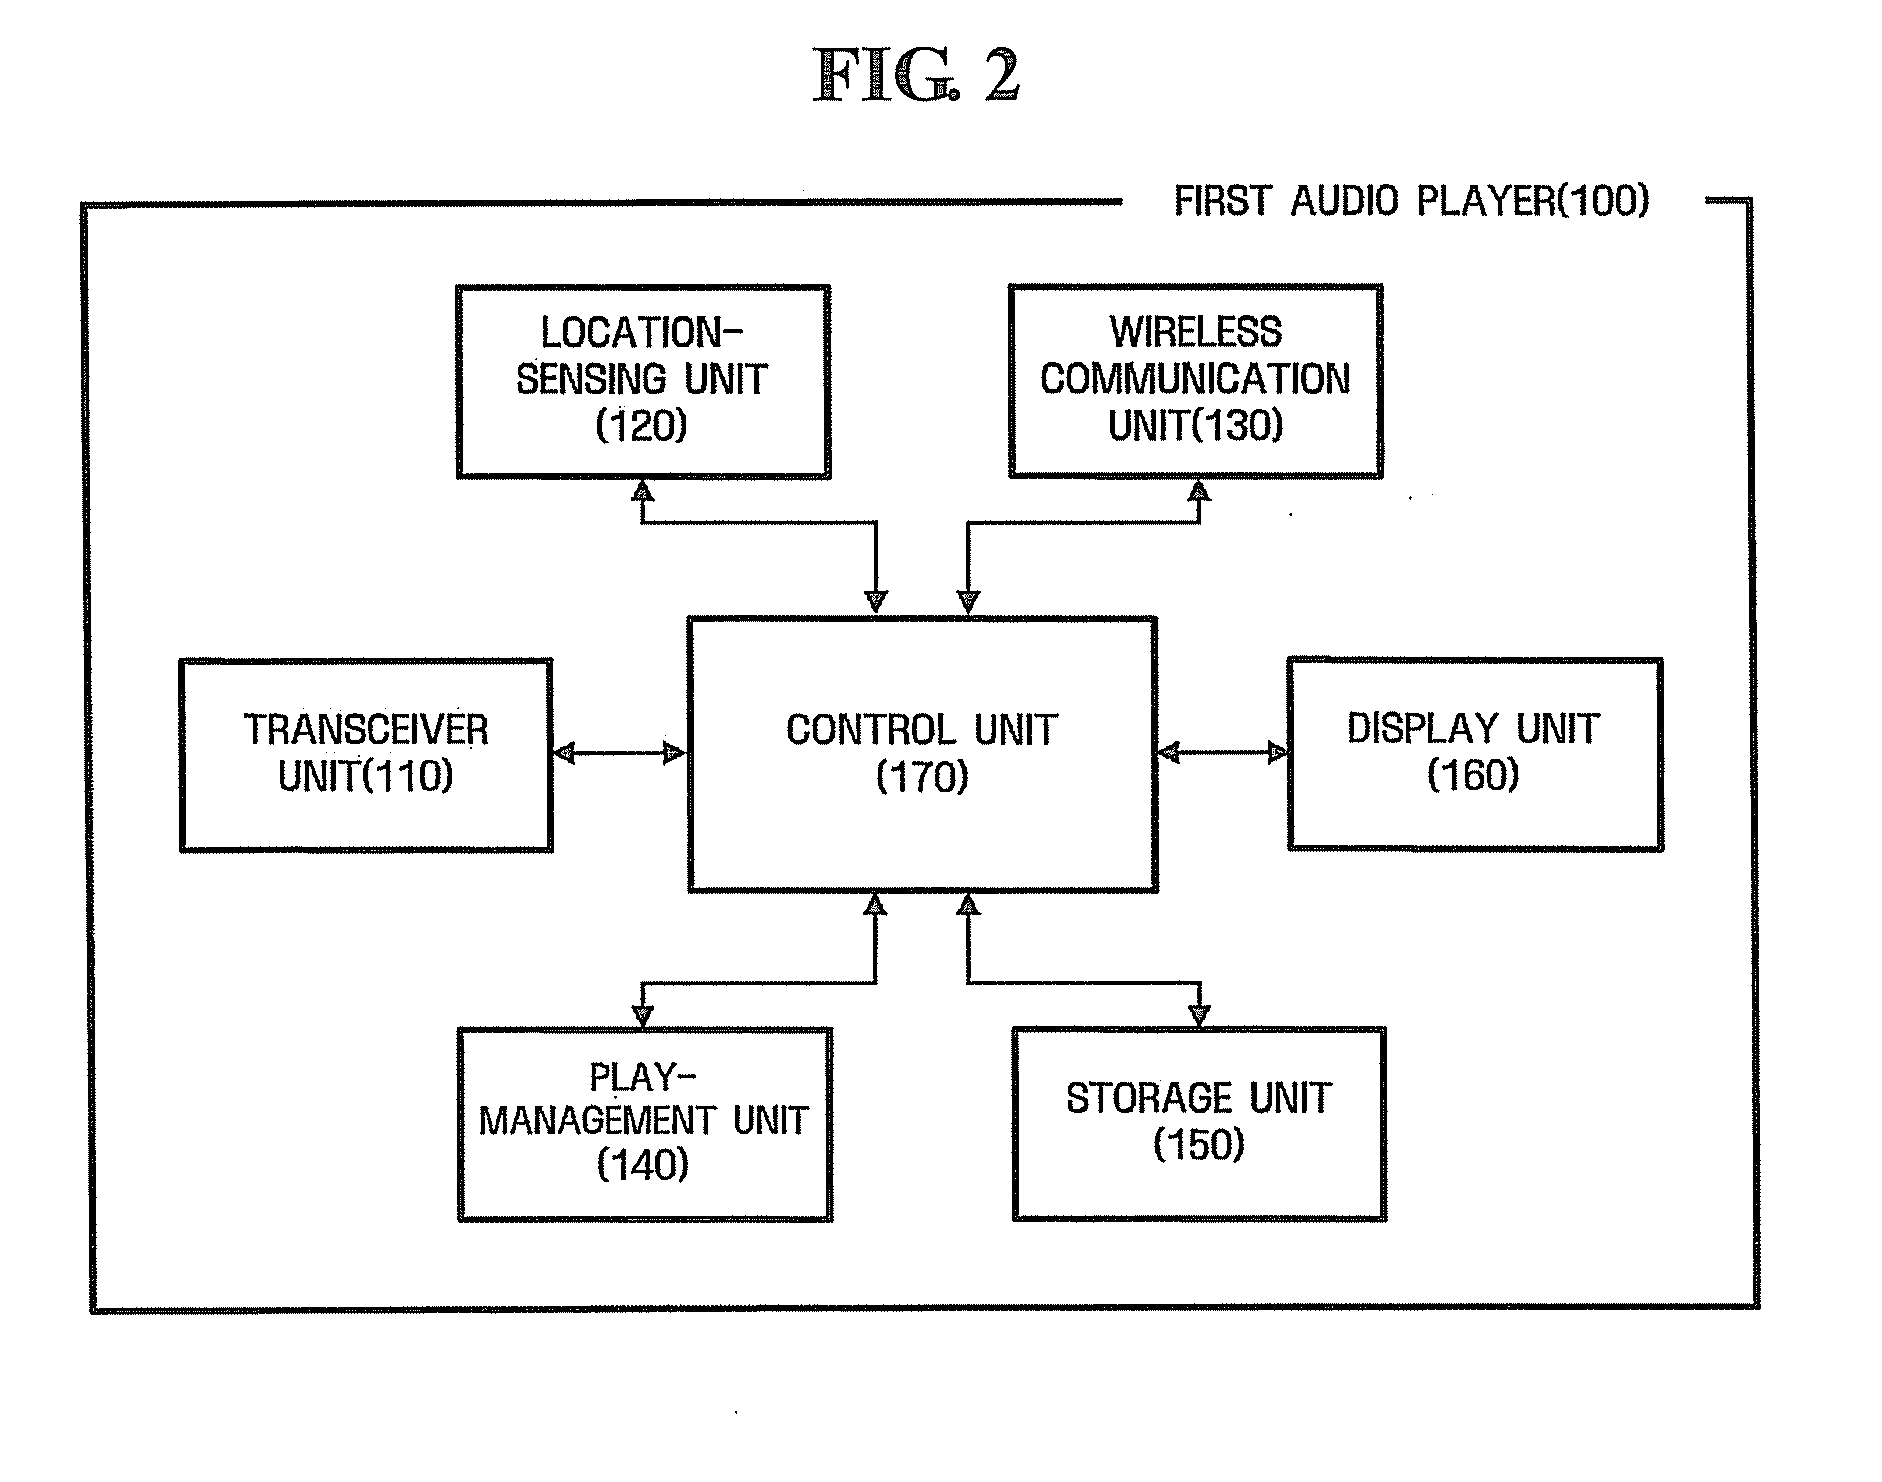 System and method for playing audio file according to received location information